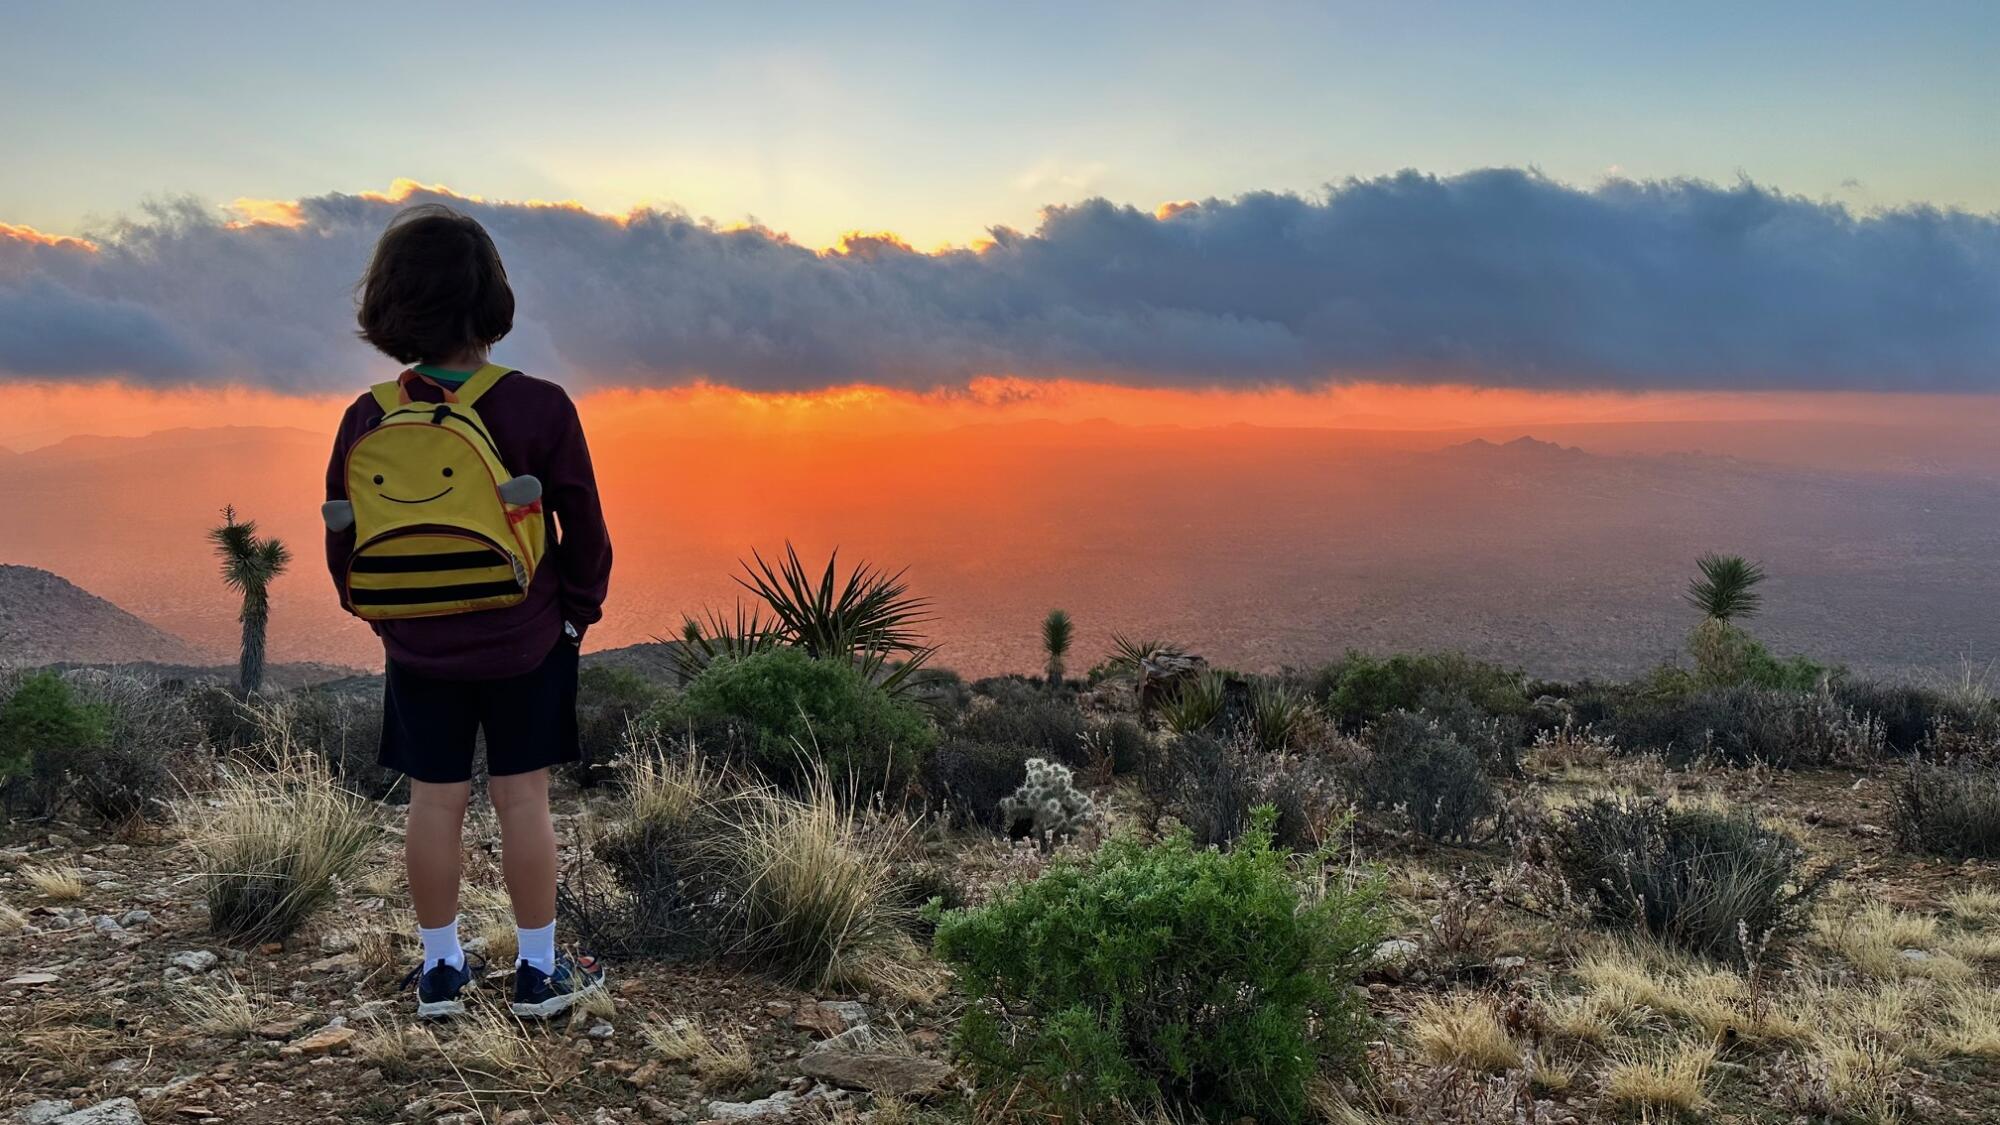 A smiling boy with a backpack of bees looks away from the camera and toward the sunrise in Joshua Tree National Park